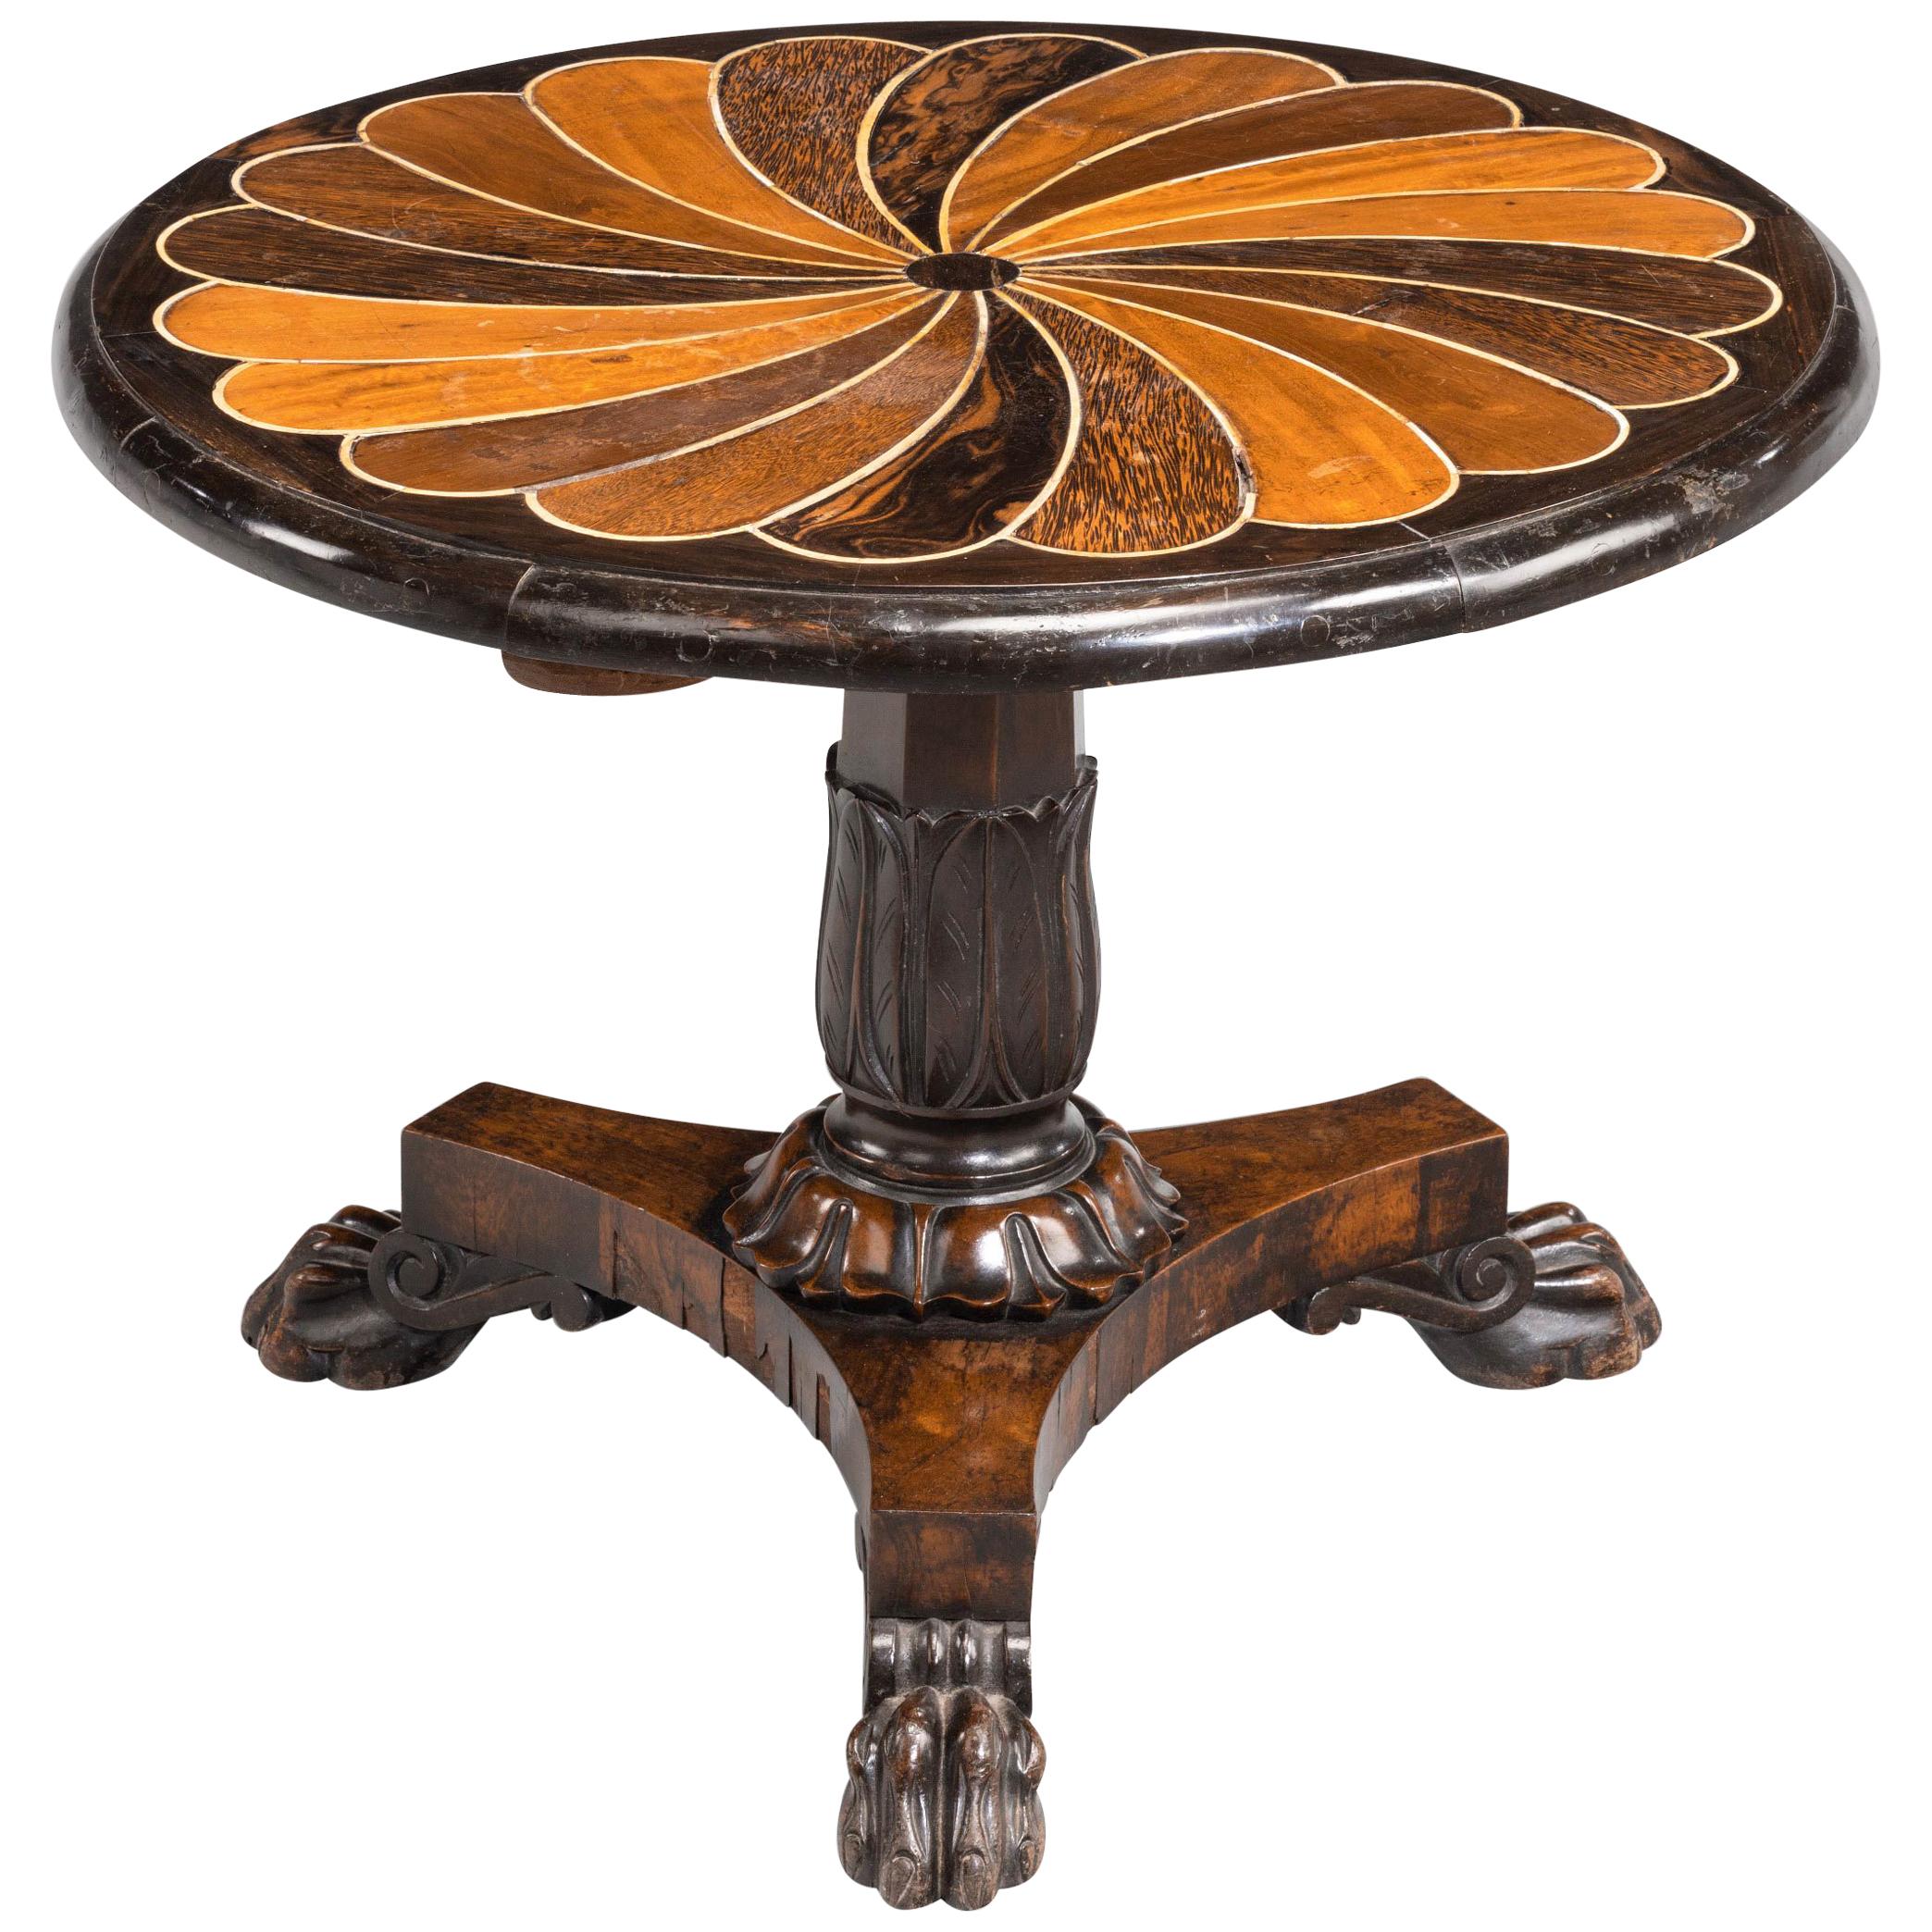 Anglo-Portuguese 19th Century Inlaid Table with Exotic Timbers For Sale